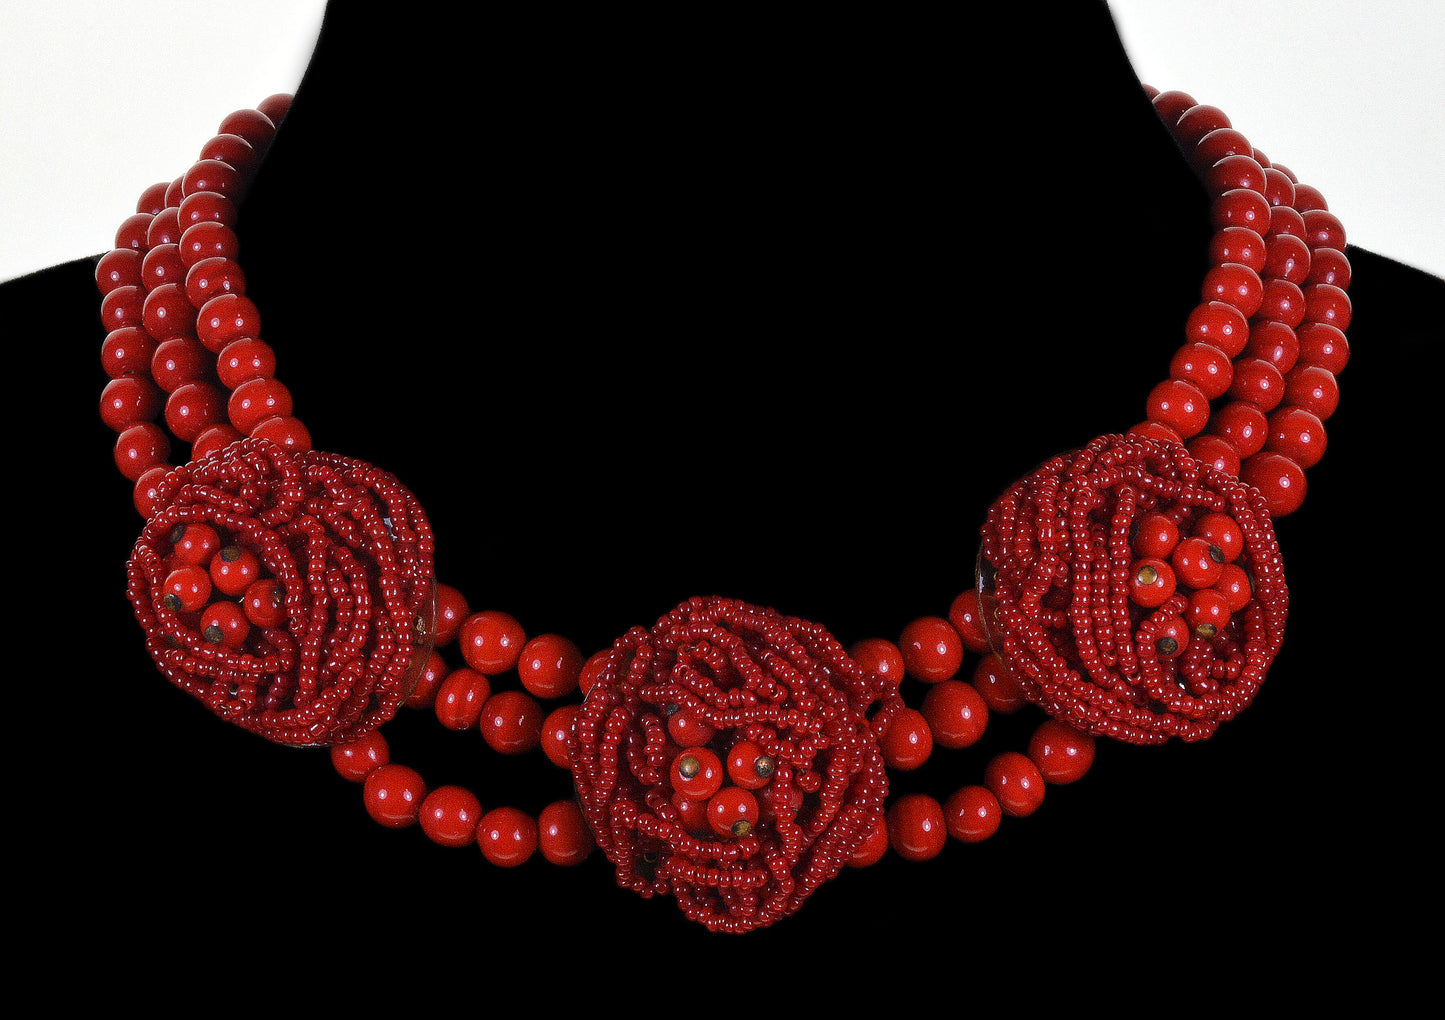 Early Miriam Haskell by Frank Hess Lipstick Red Glass Necklace C.1930